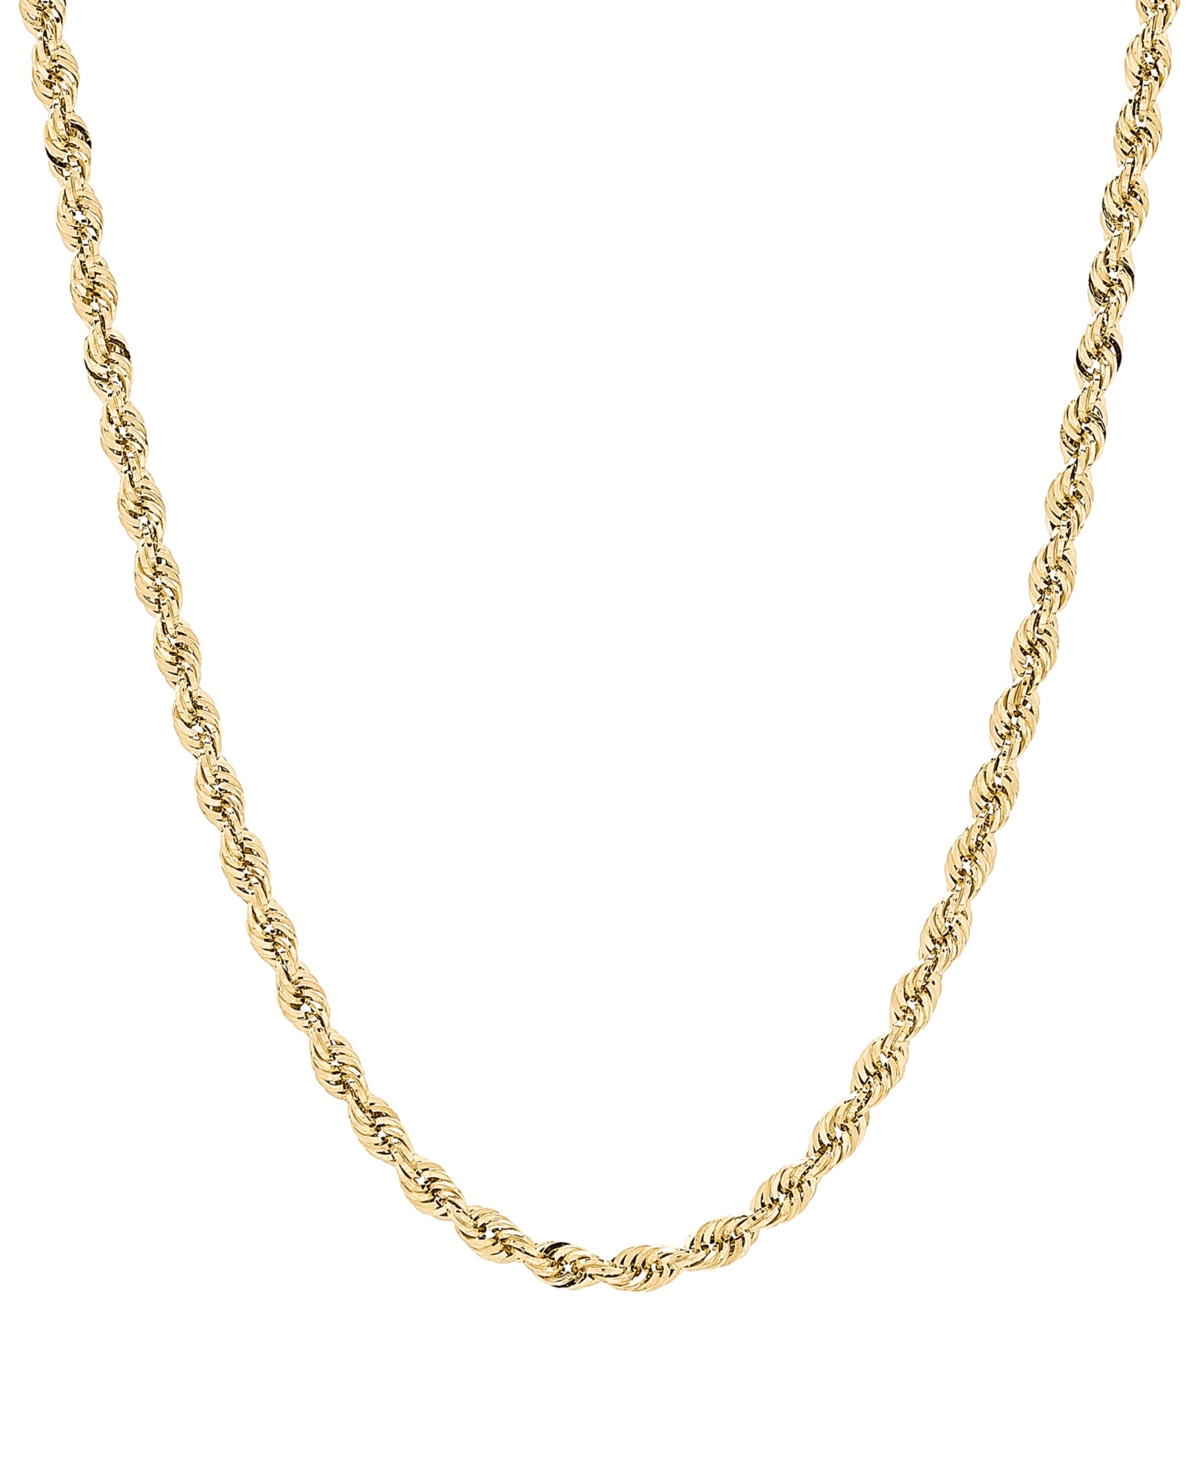 Macy's Glitter Rope Link 24" Chain Necklace (4-1/2mm) in 14k Gold